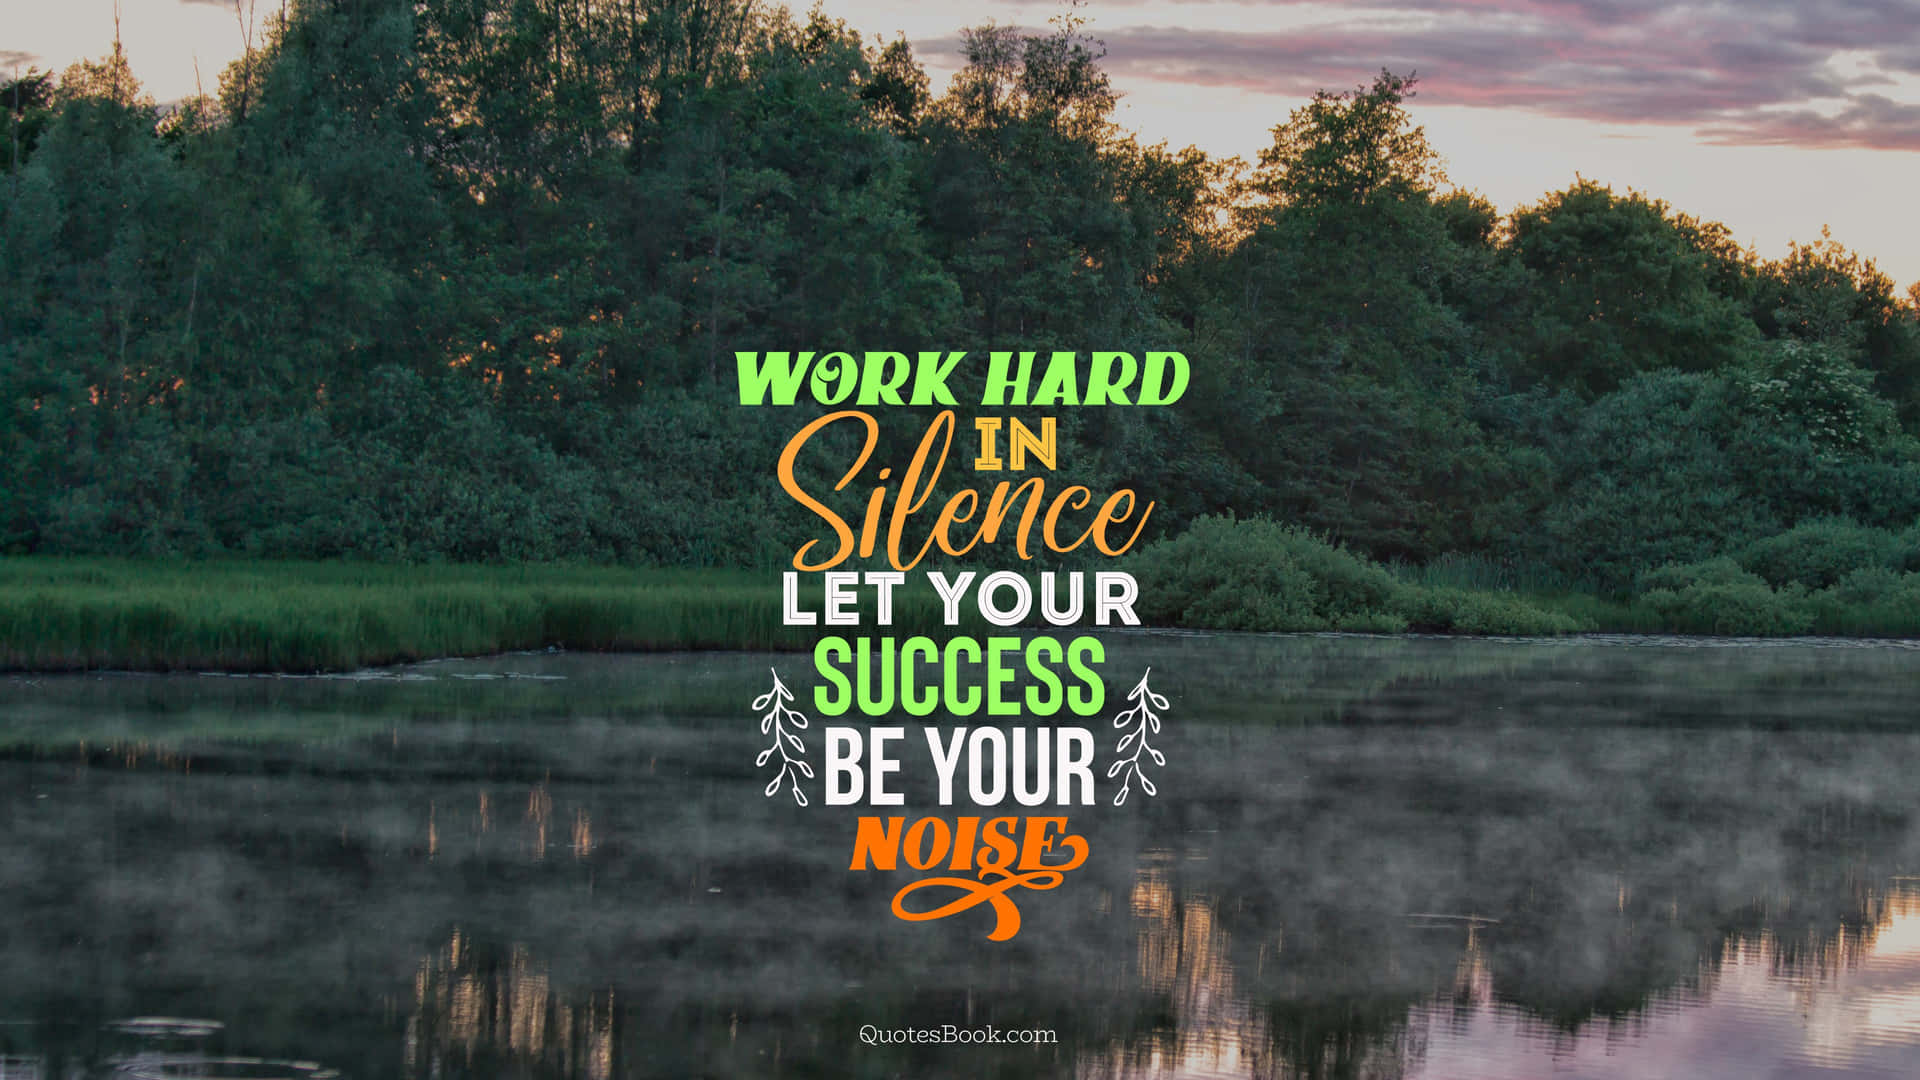 "Work Hard to Achieve Your Dreams" Wallpaper